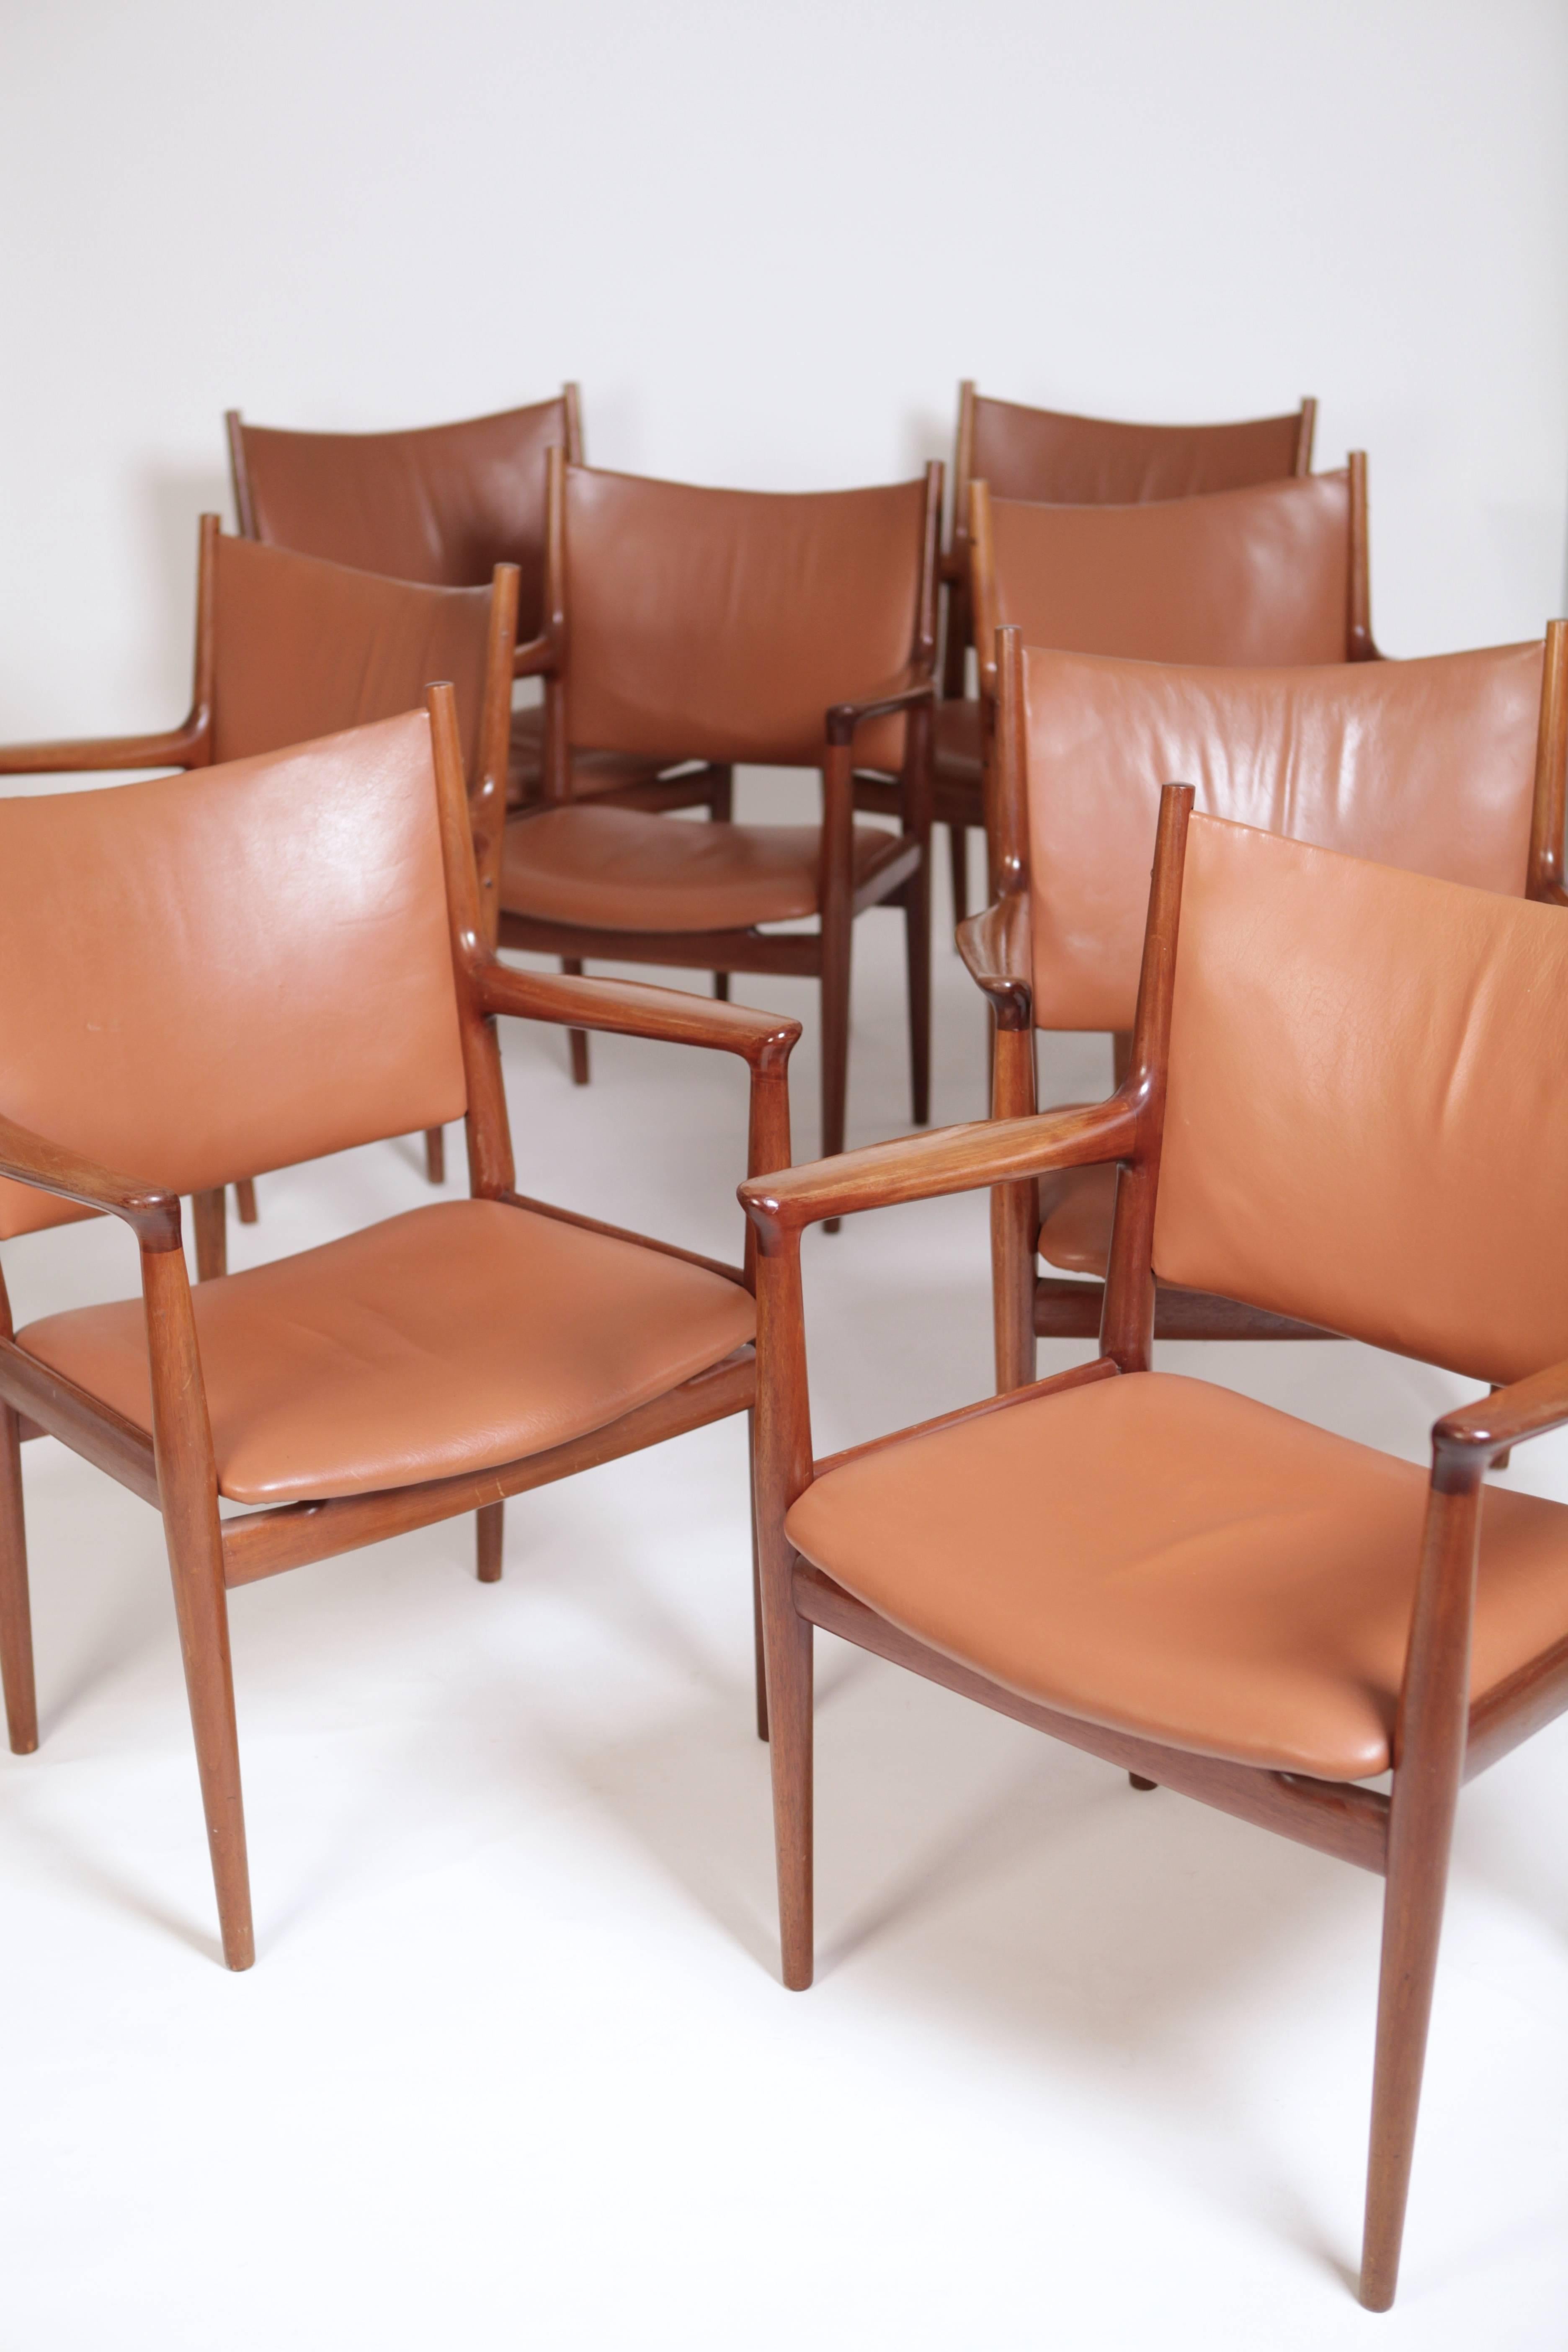 A set of eight Hans Wegner JH513 armchairs in solid mahogany and leather.
Executed by cabinet maker Johannes Hansen in Copenhagen.
Each chair signed to the underside.